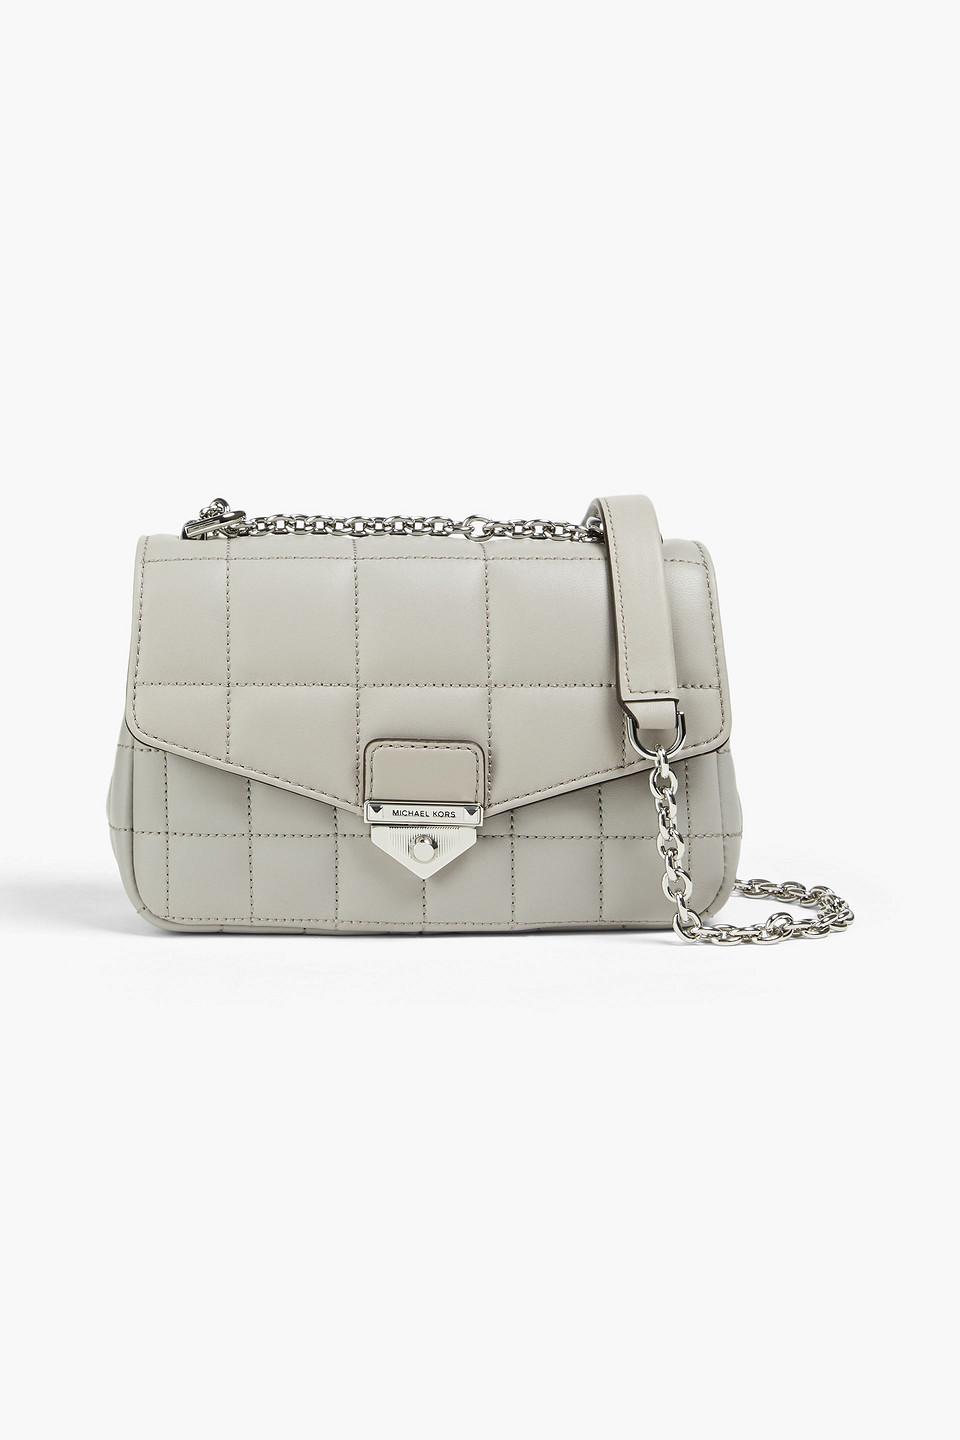 MICHAEL Michael Kors Soho Quilted Leather Shoulder Bag in Grey | Lyst Canada